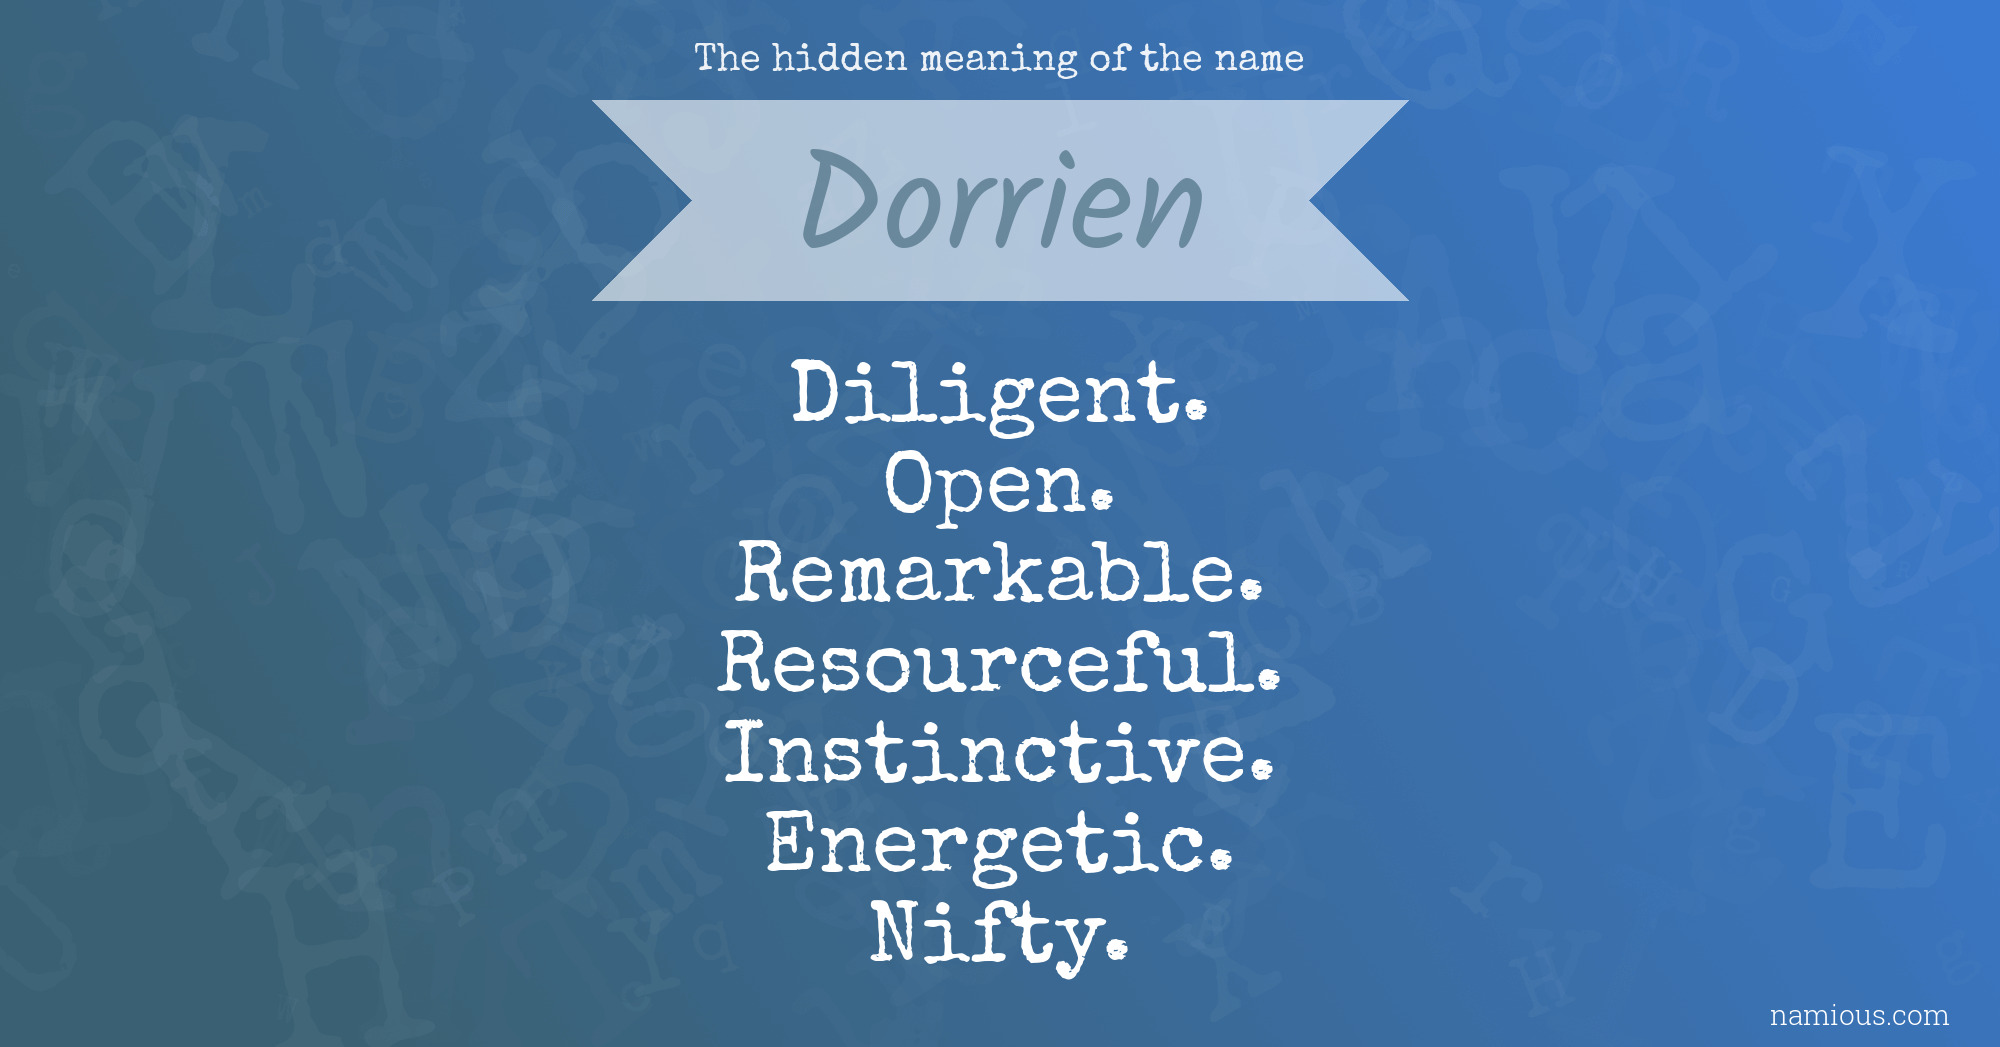 The hidden meaning of the name Dorrien